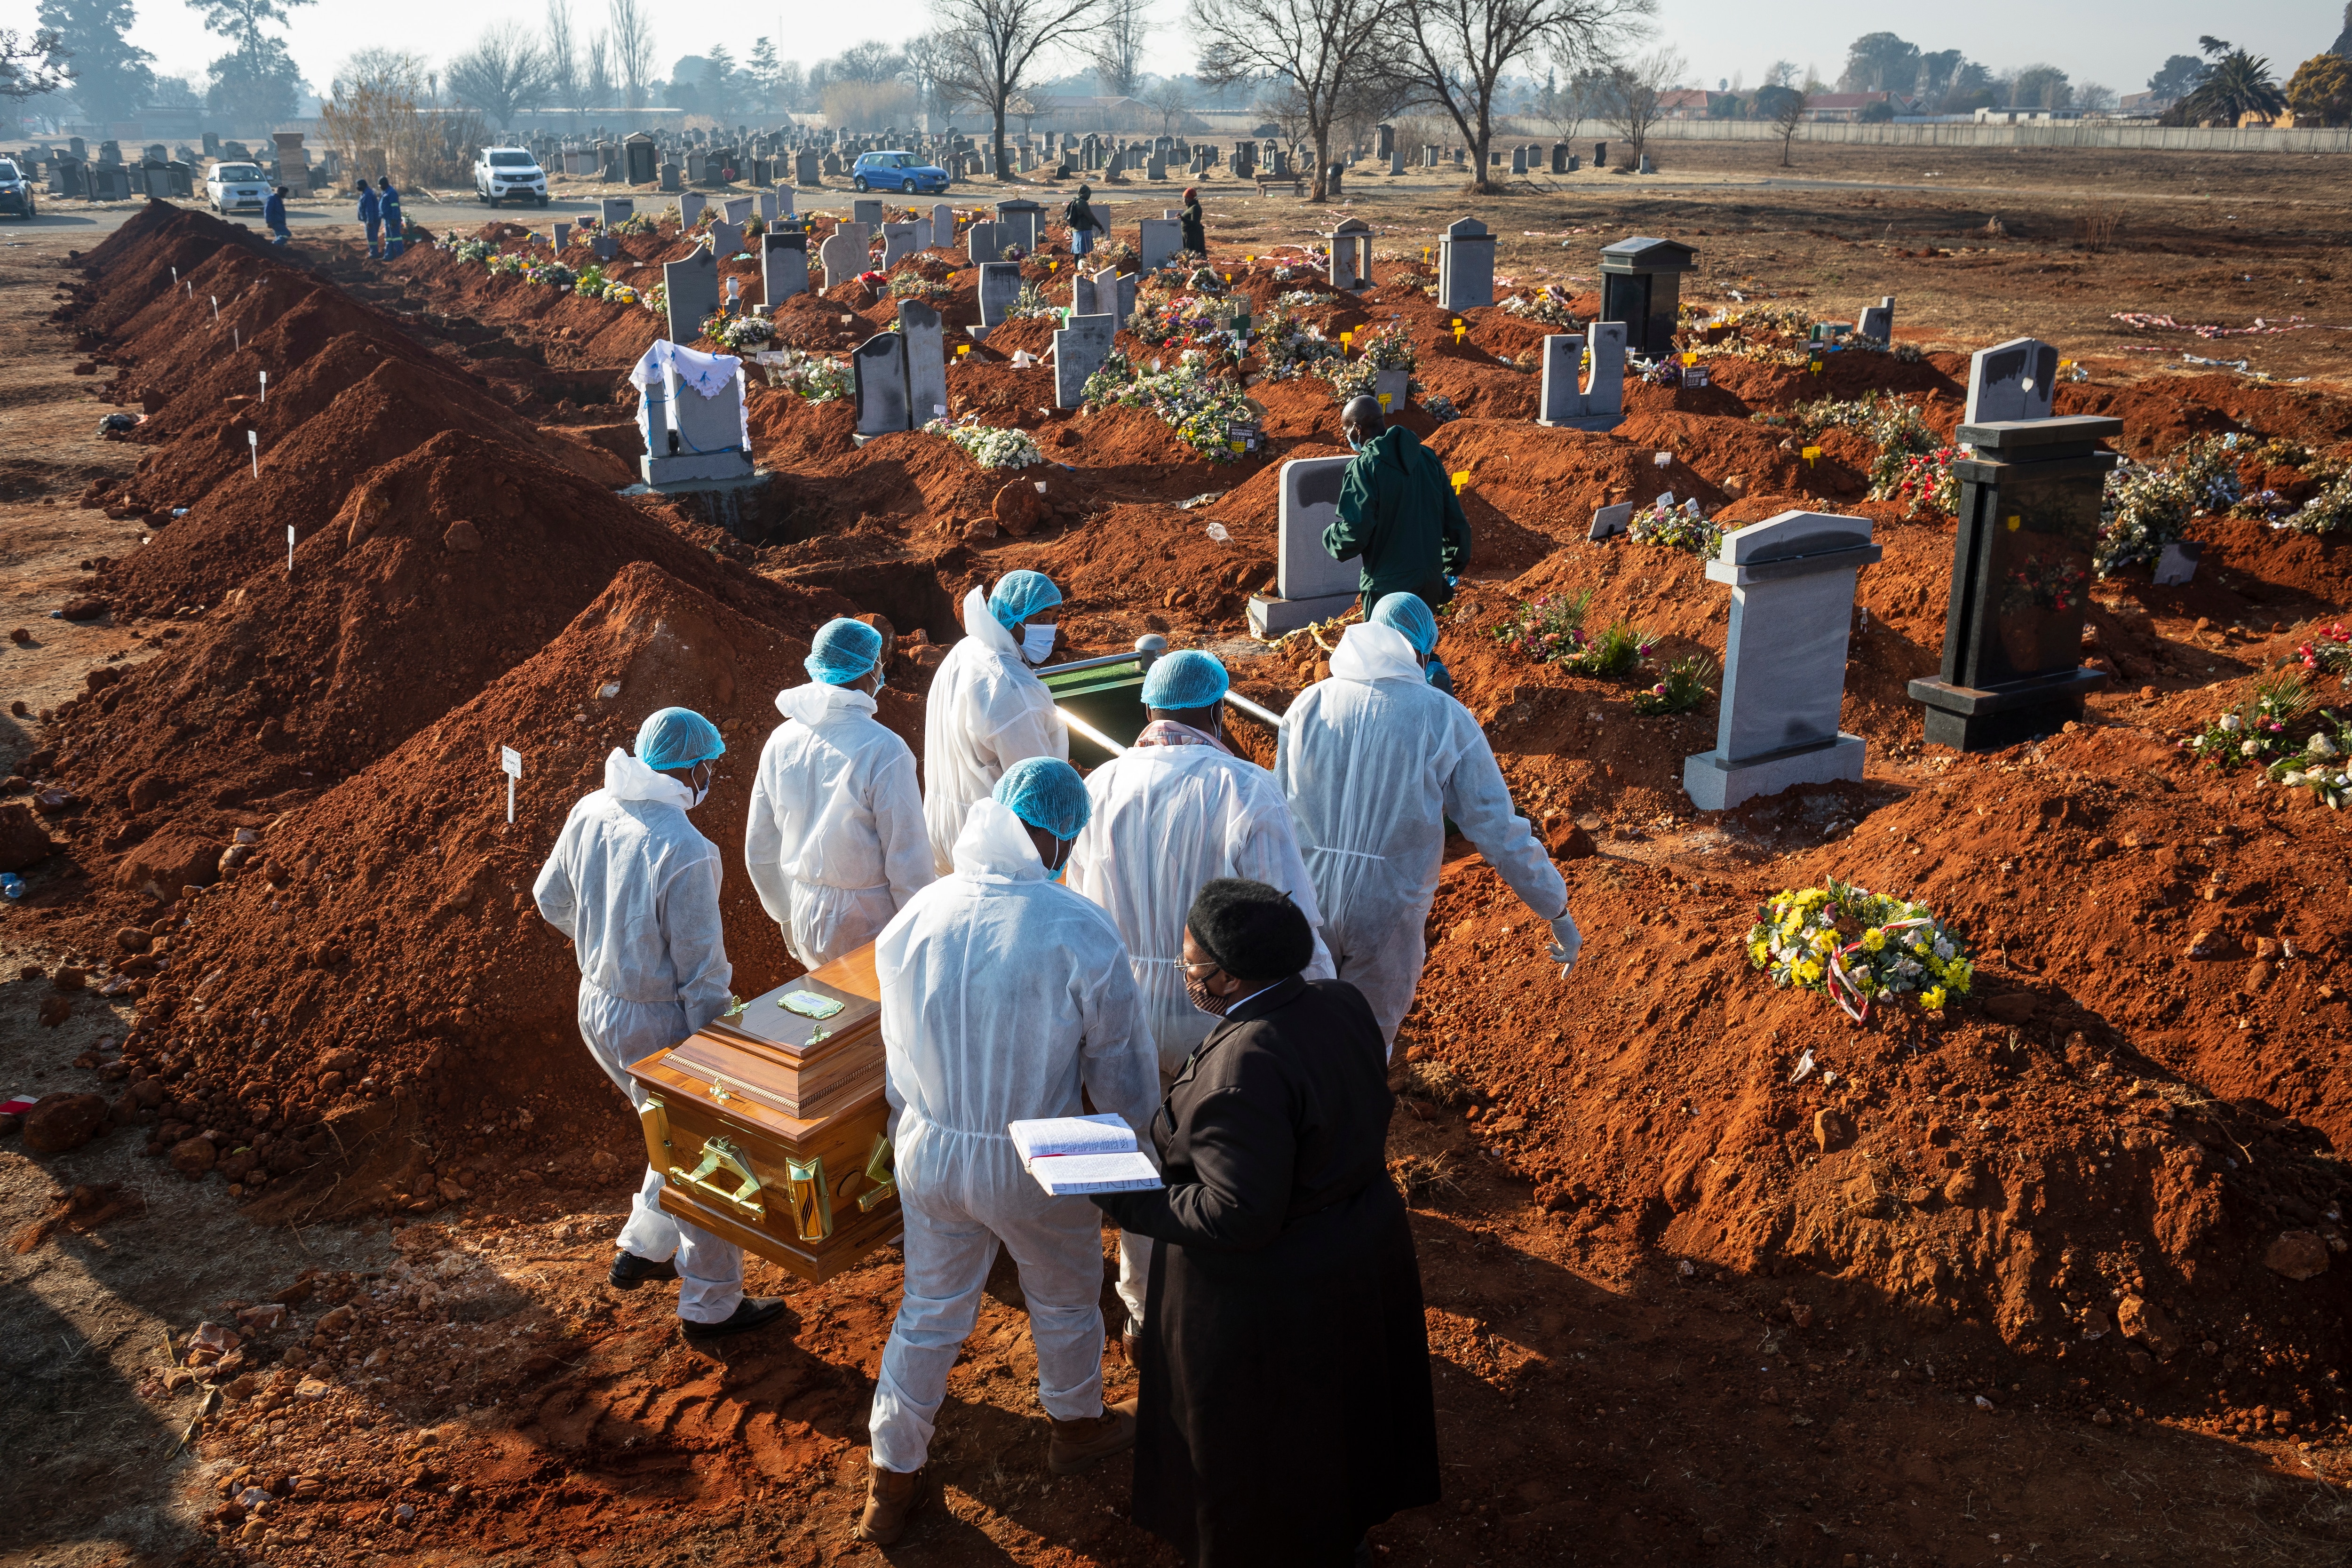 Family members wearing full PPE suits carry the remains of their elderly family member who died of COVID-19 in Johannesburg, South Africa.